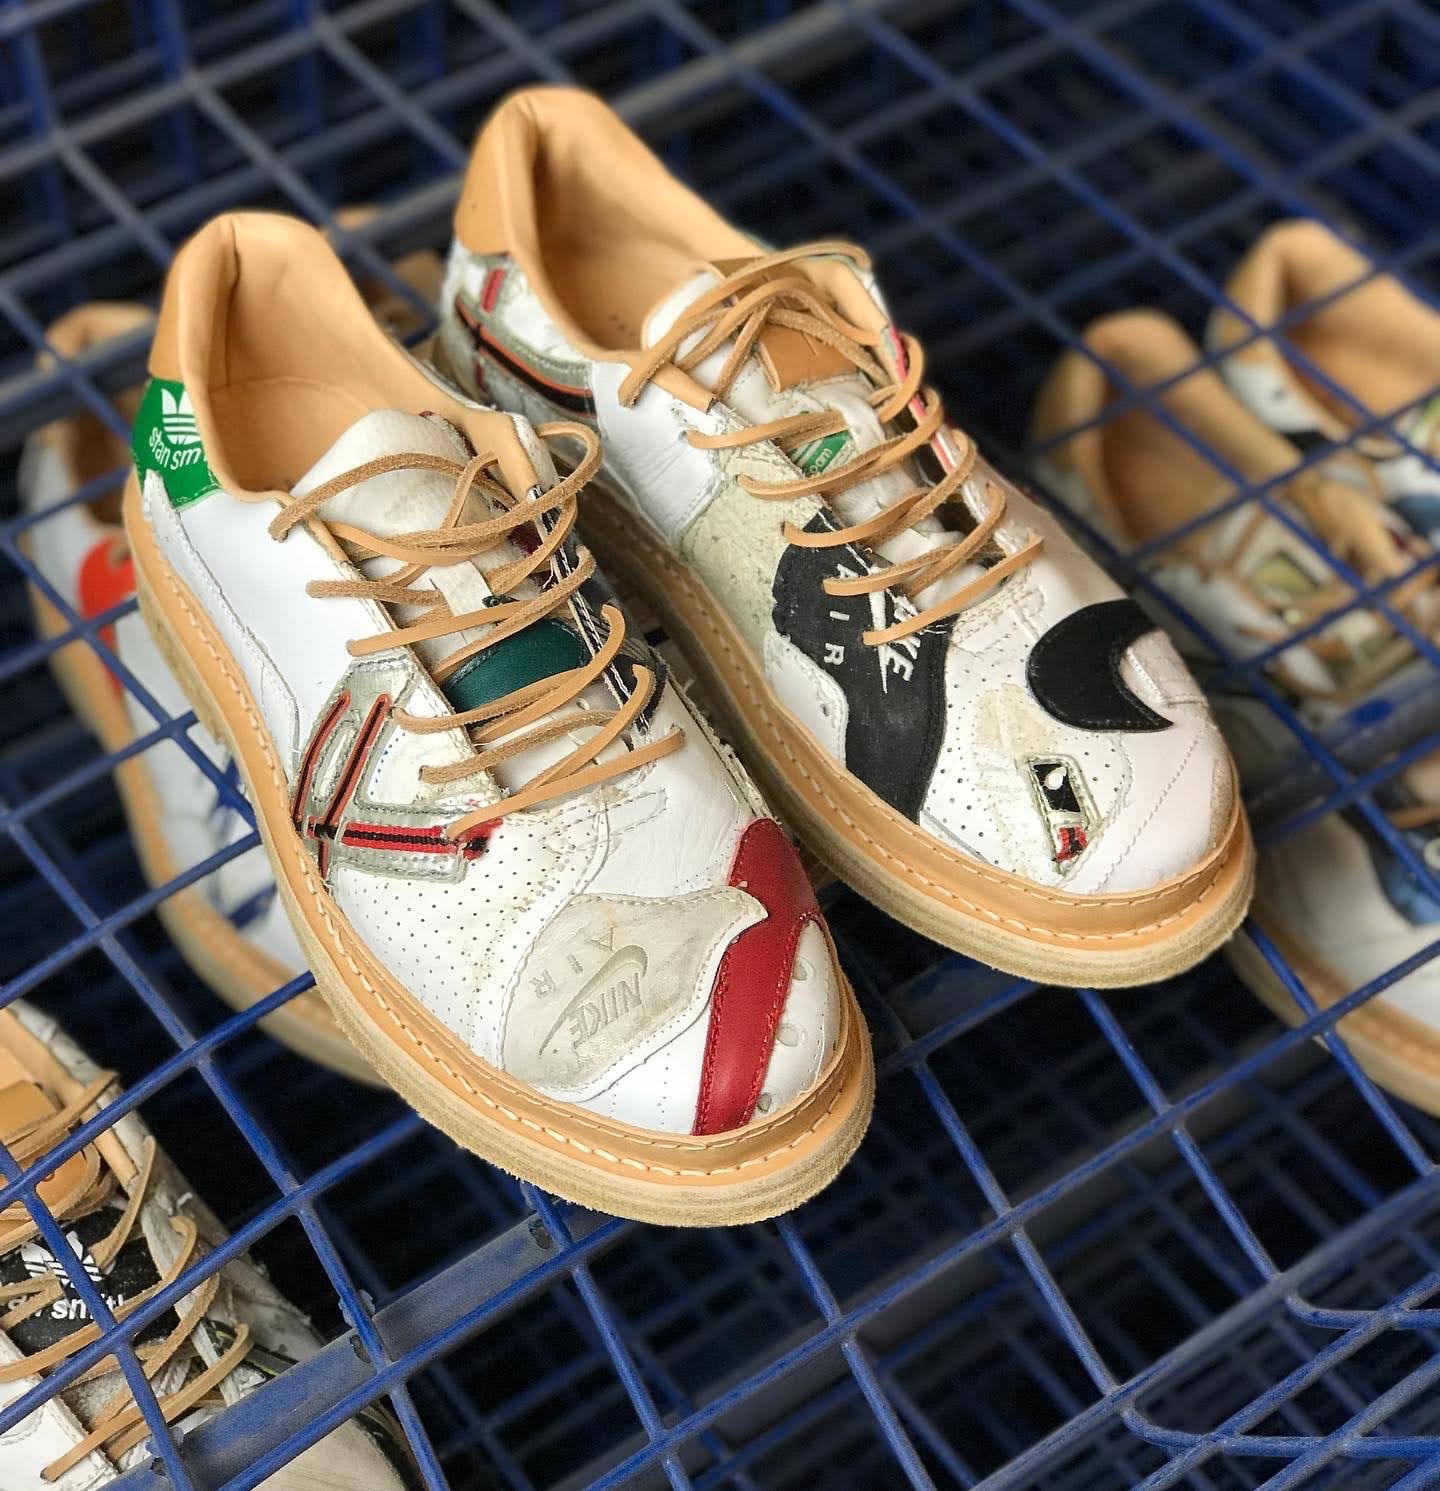 At the Forefront of Sustainable Fashion, Peterson Stoop Reconstructs Tattered Sneakers into New Patchwork Designs